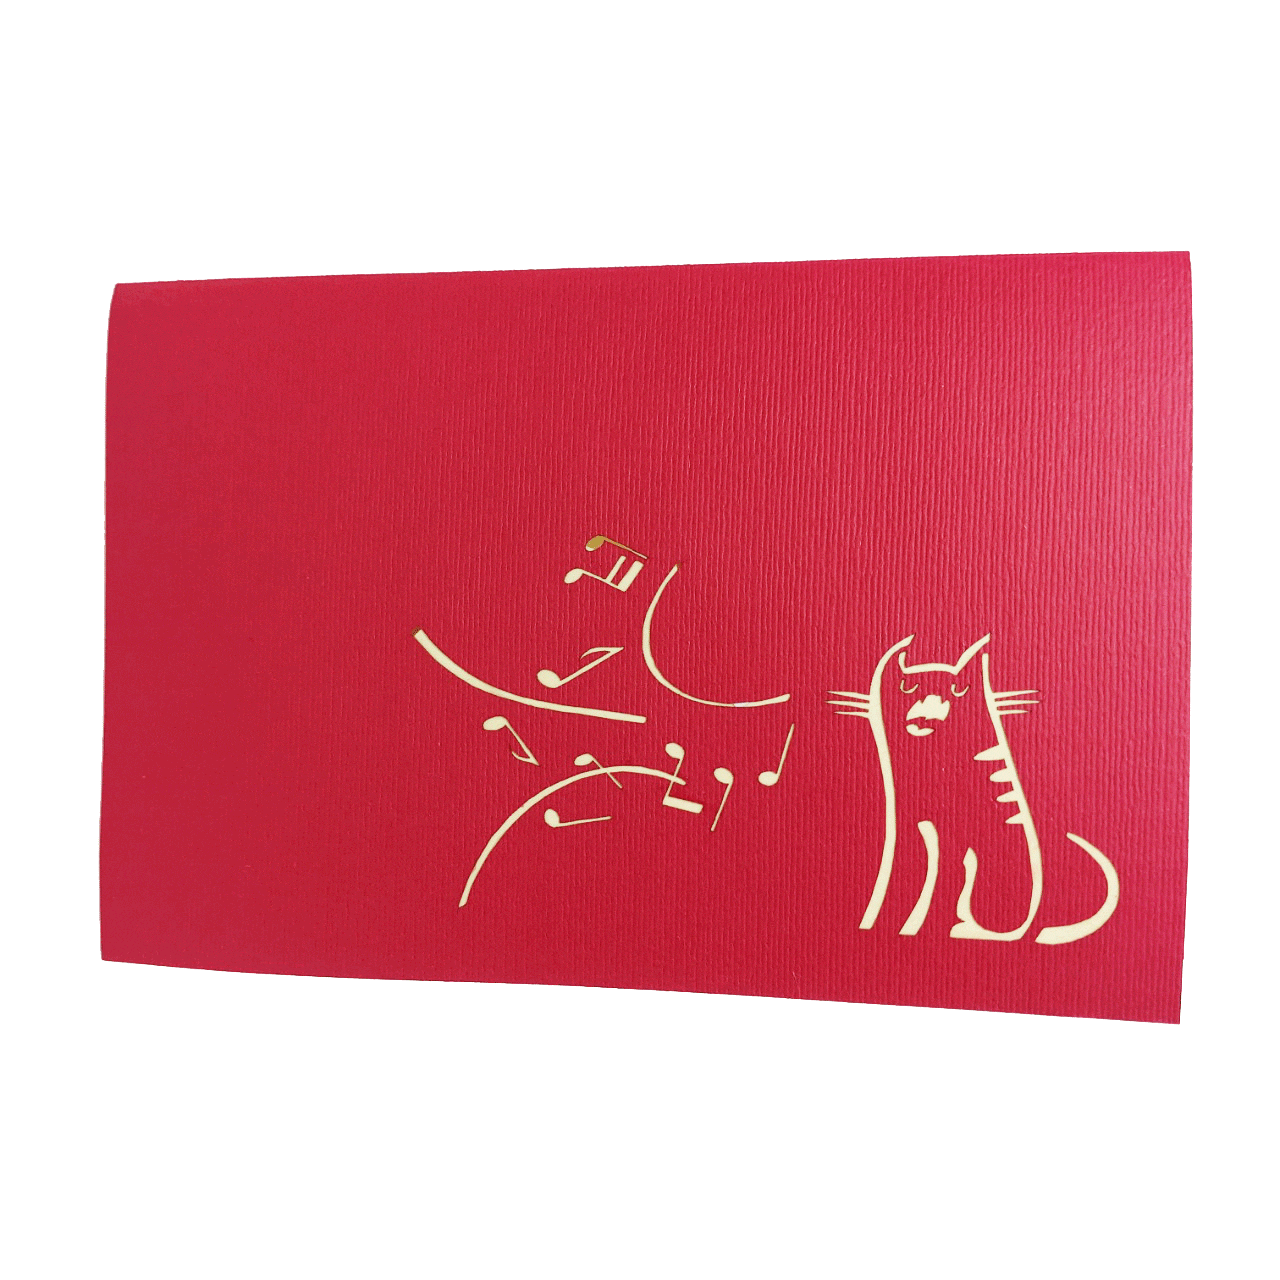 Singing Cat pop up card cover